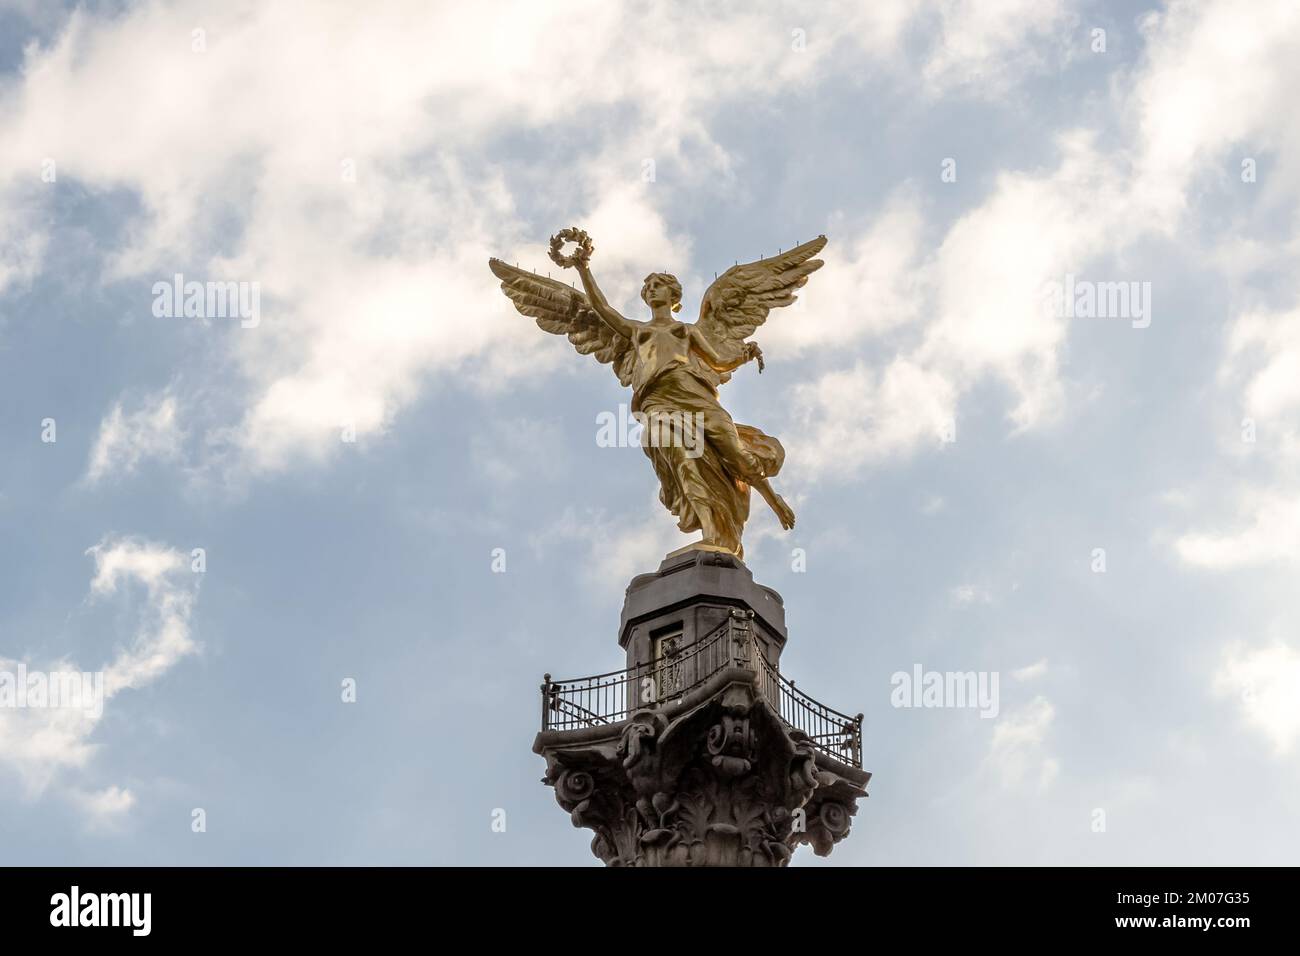 Architectural detail of The Angel of Independence, a victory column on a roundabout on the major thoroughfare of Paseo de la Reforma in Mexico City Stock Photo